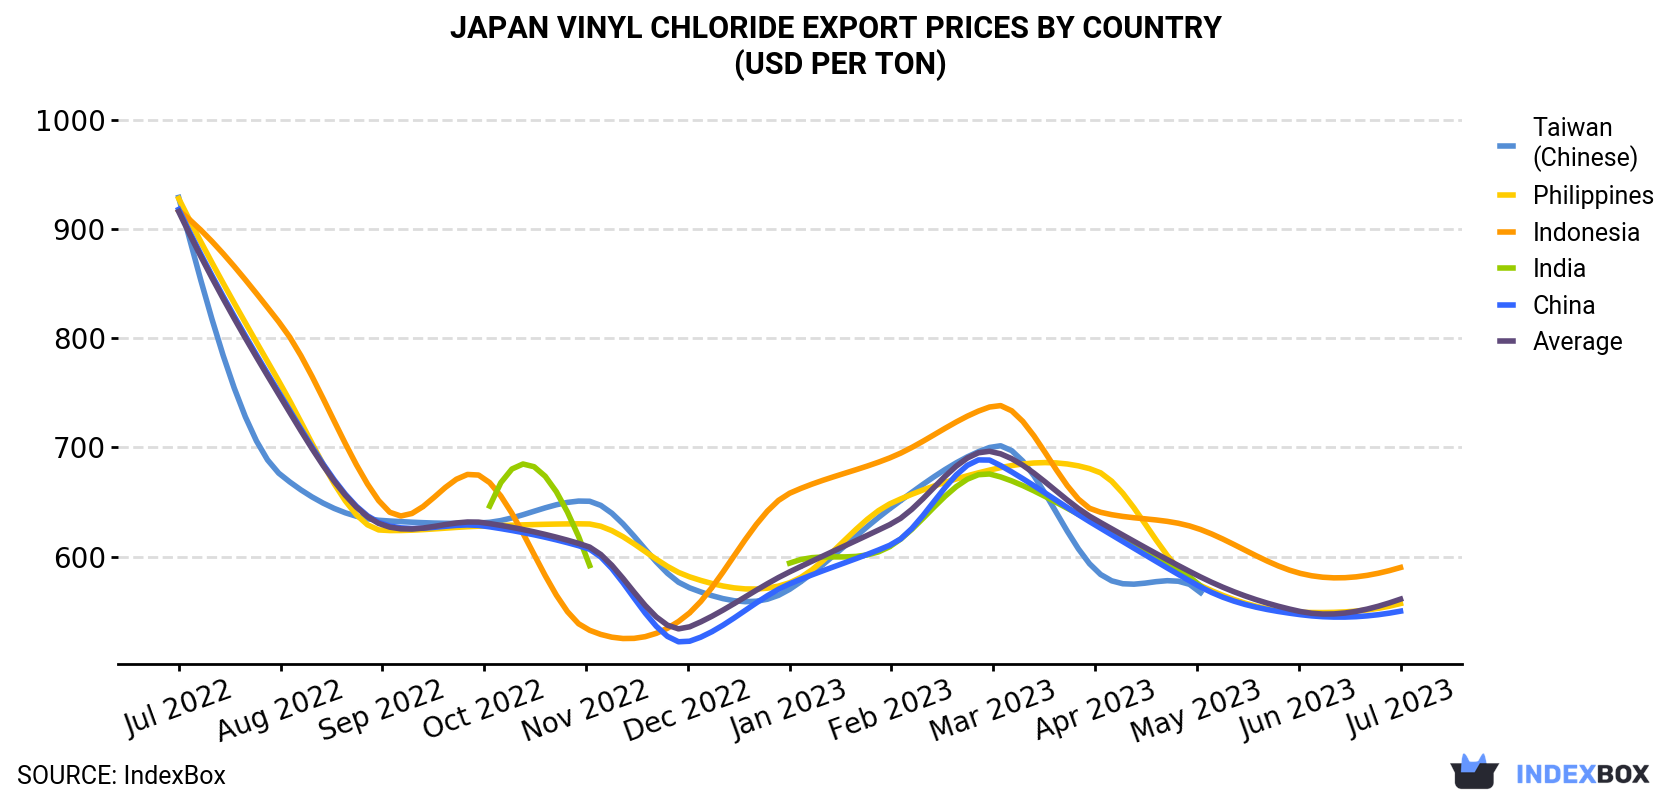 Japan Vinyl Chloride Export Prices By Country (USD Per Ton)